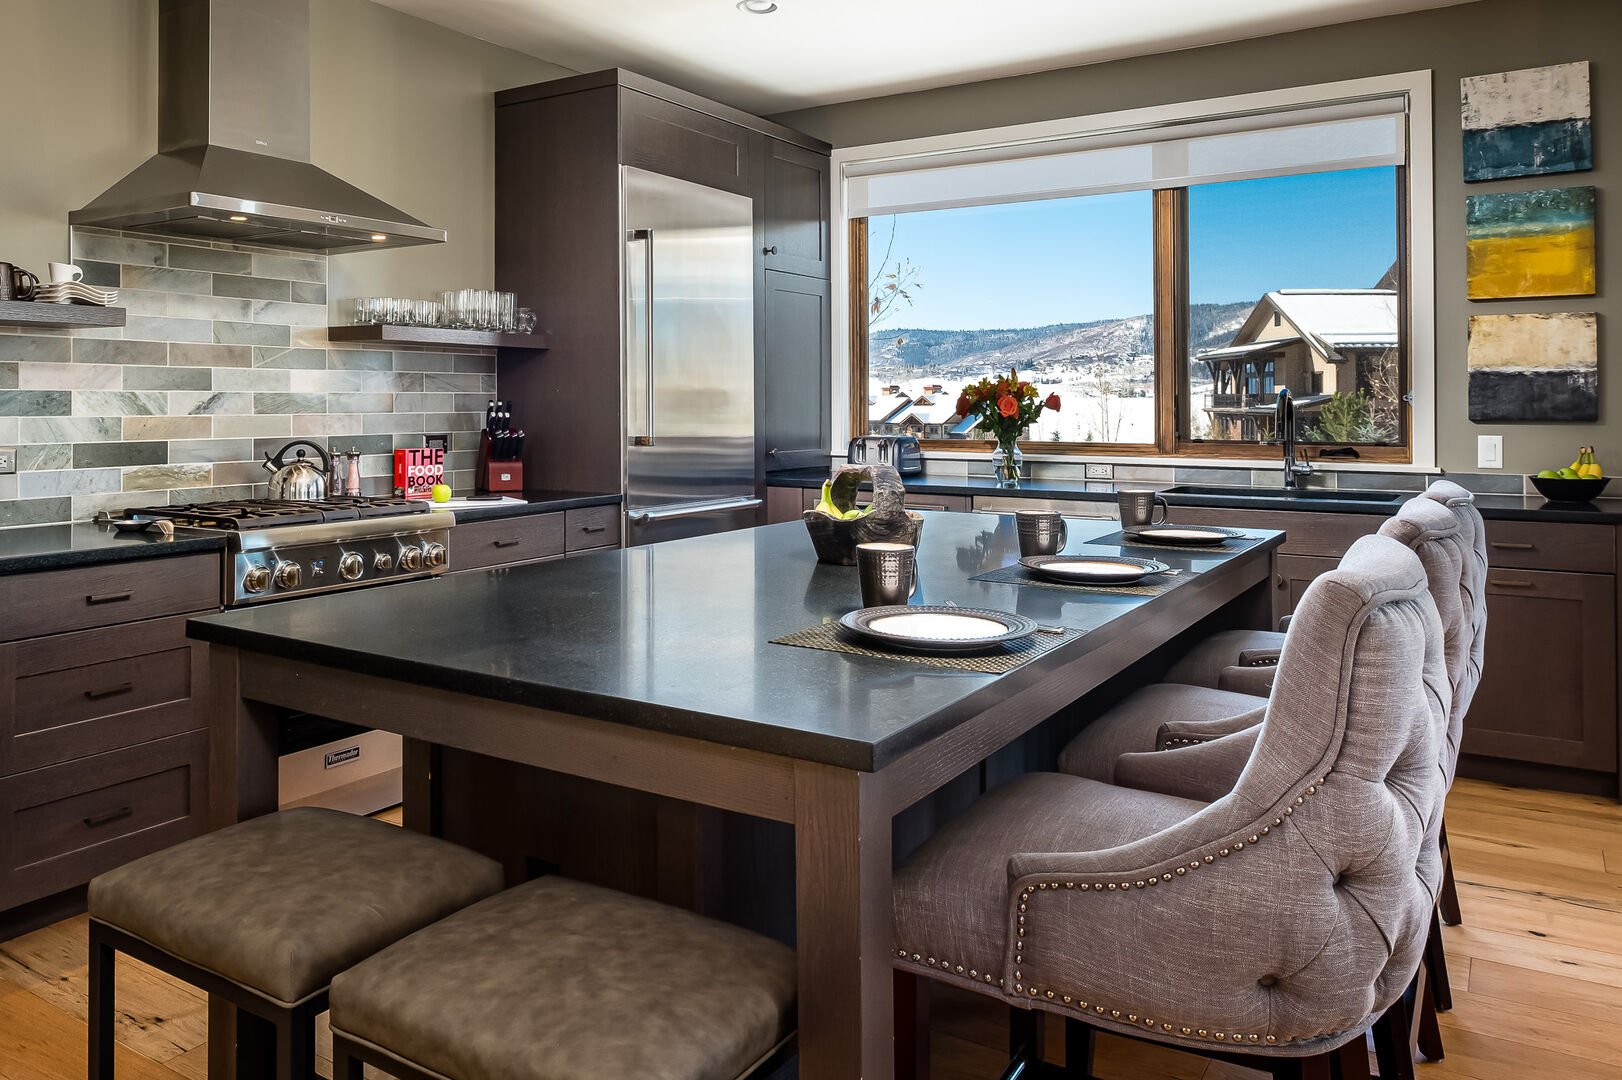 The spacious kitchen island with a view of Emerald Mountain and over the top sunsets.